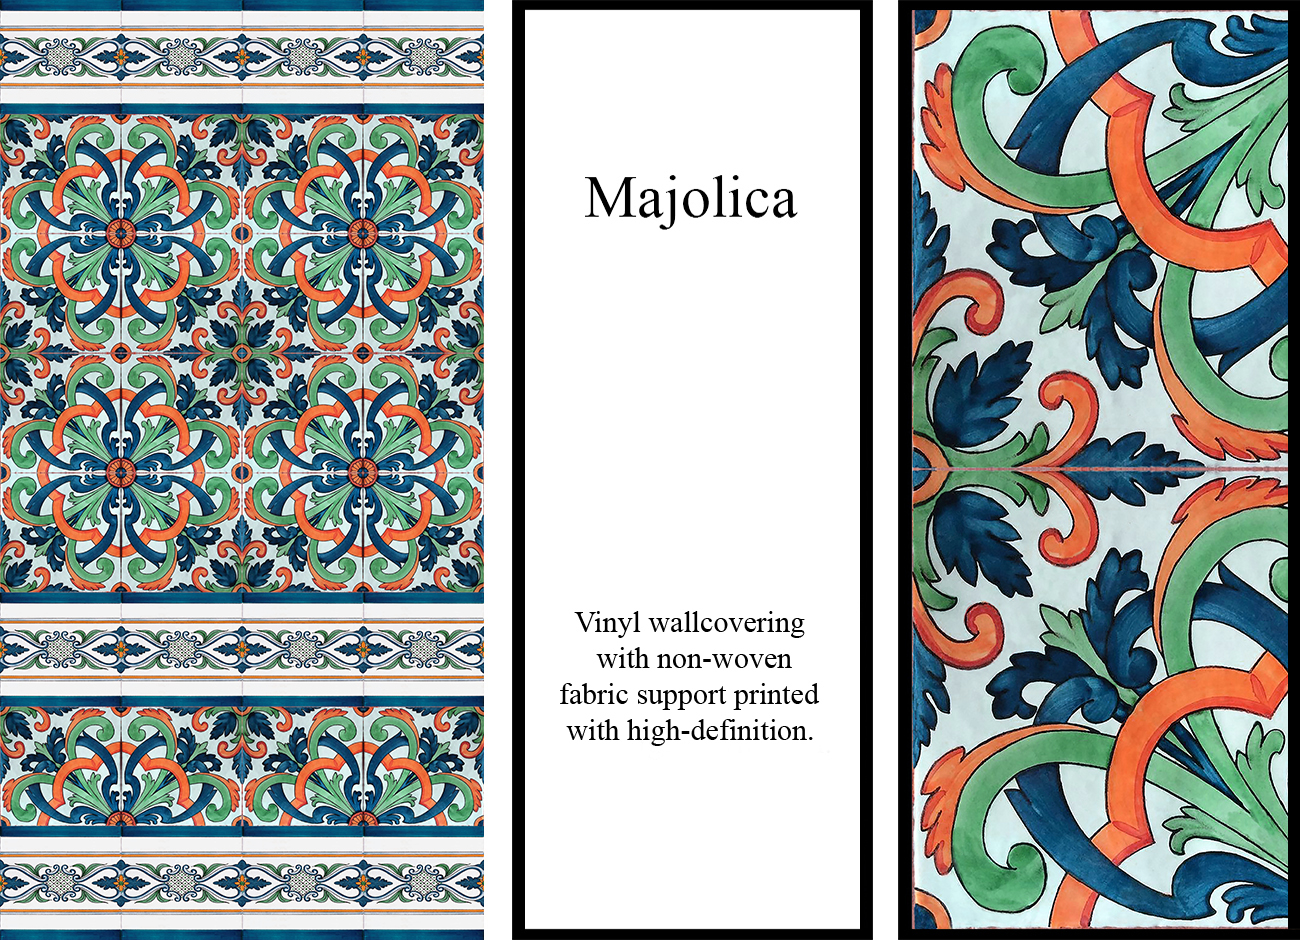 Mediterranean-style majolica wallpaper with floral motifs in bright blue, green and orange colours